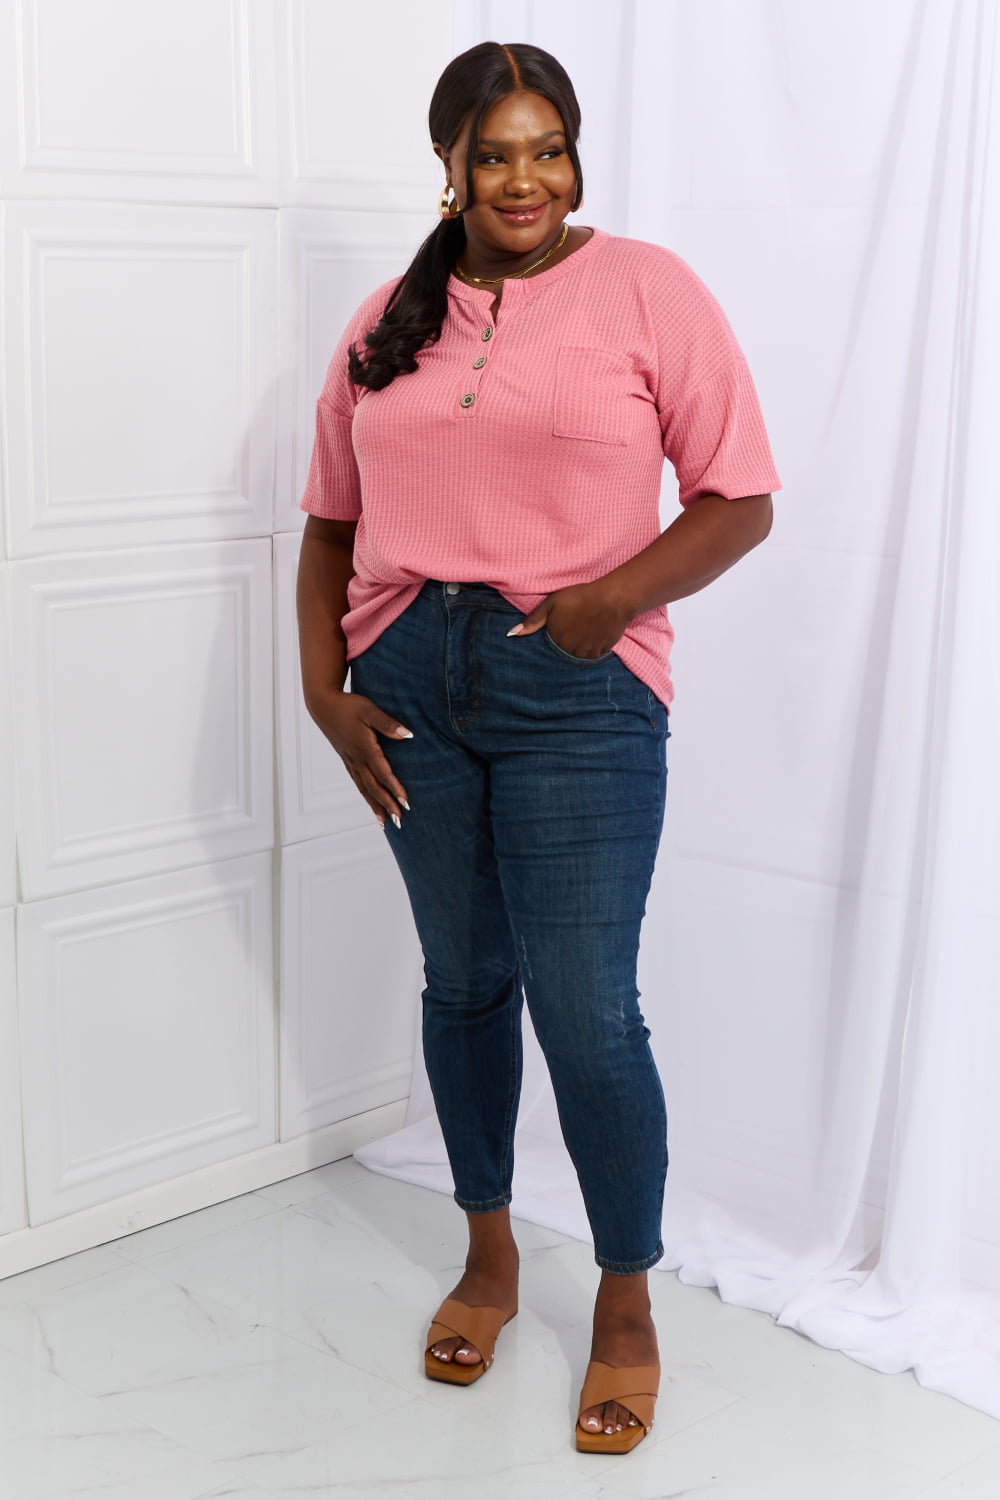 Made For You 1/4 Button Down Waffle Top in Coral